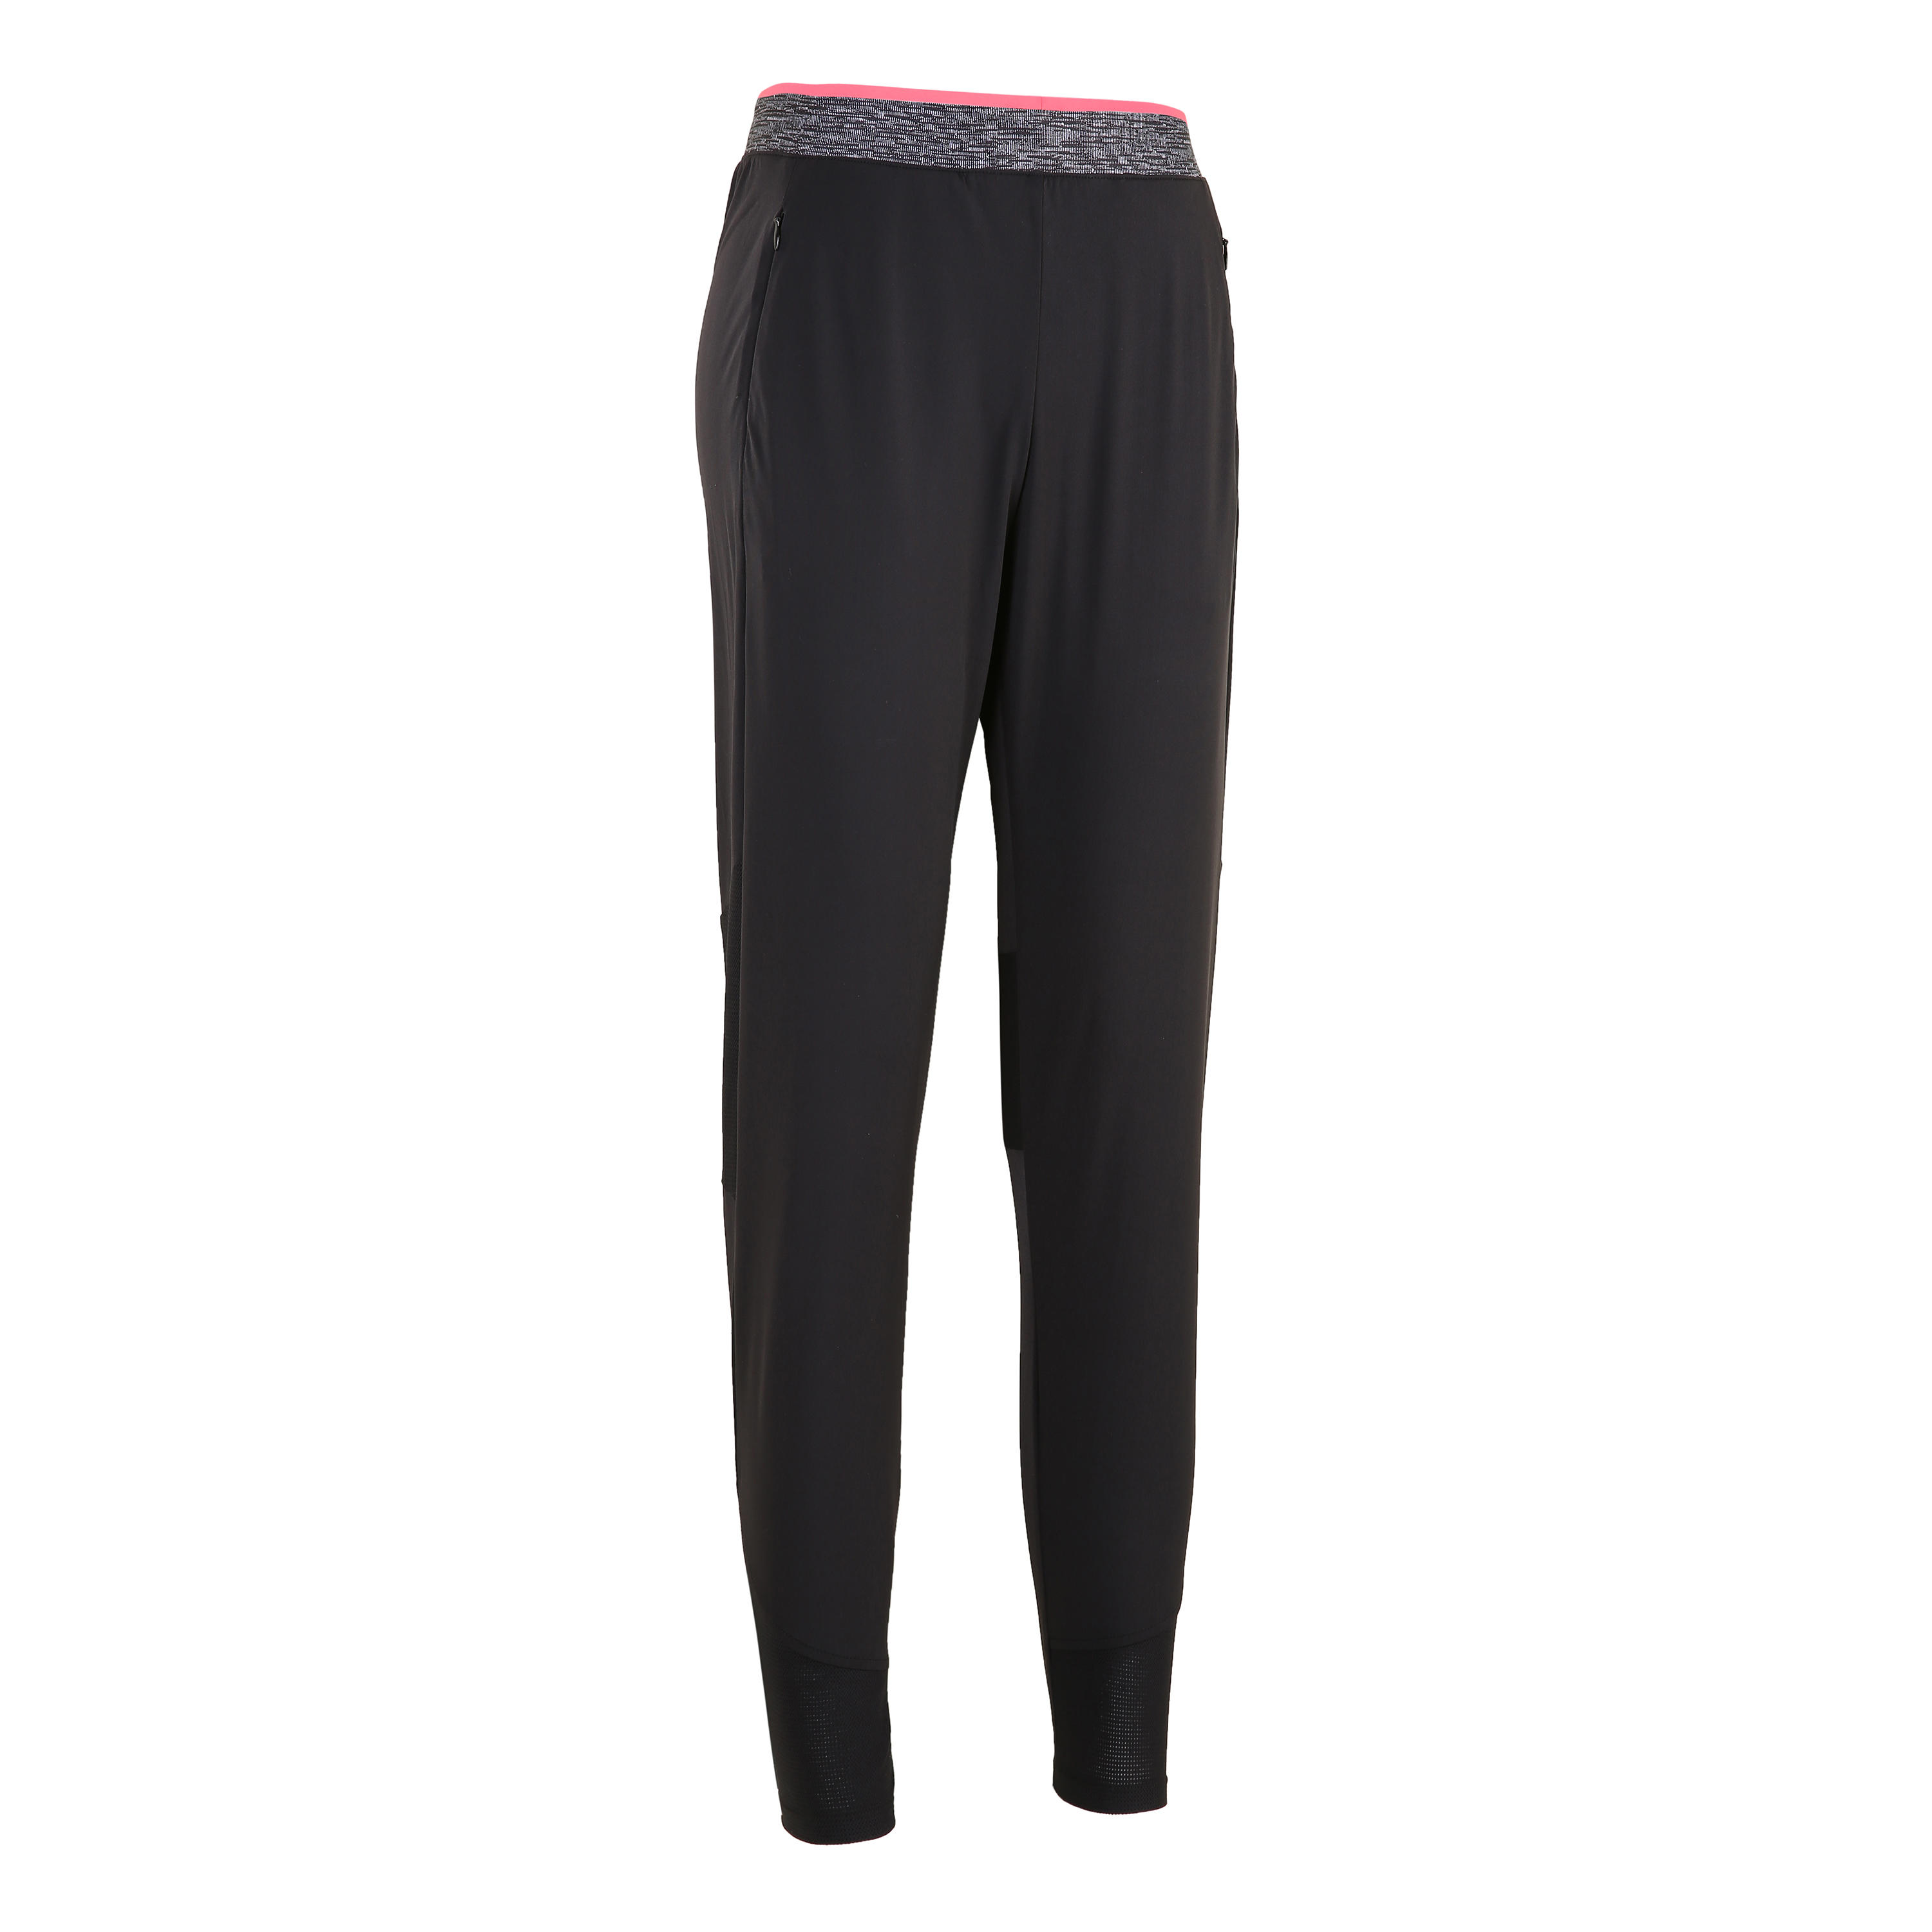 Buy Women Polyester Long-Sleeved Cropped Gym T-Shirt Online | Decathlon